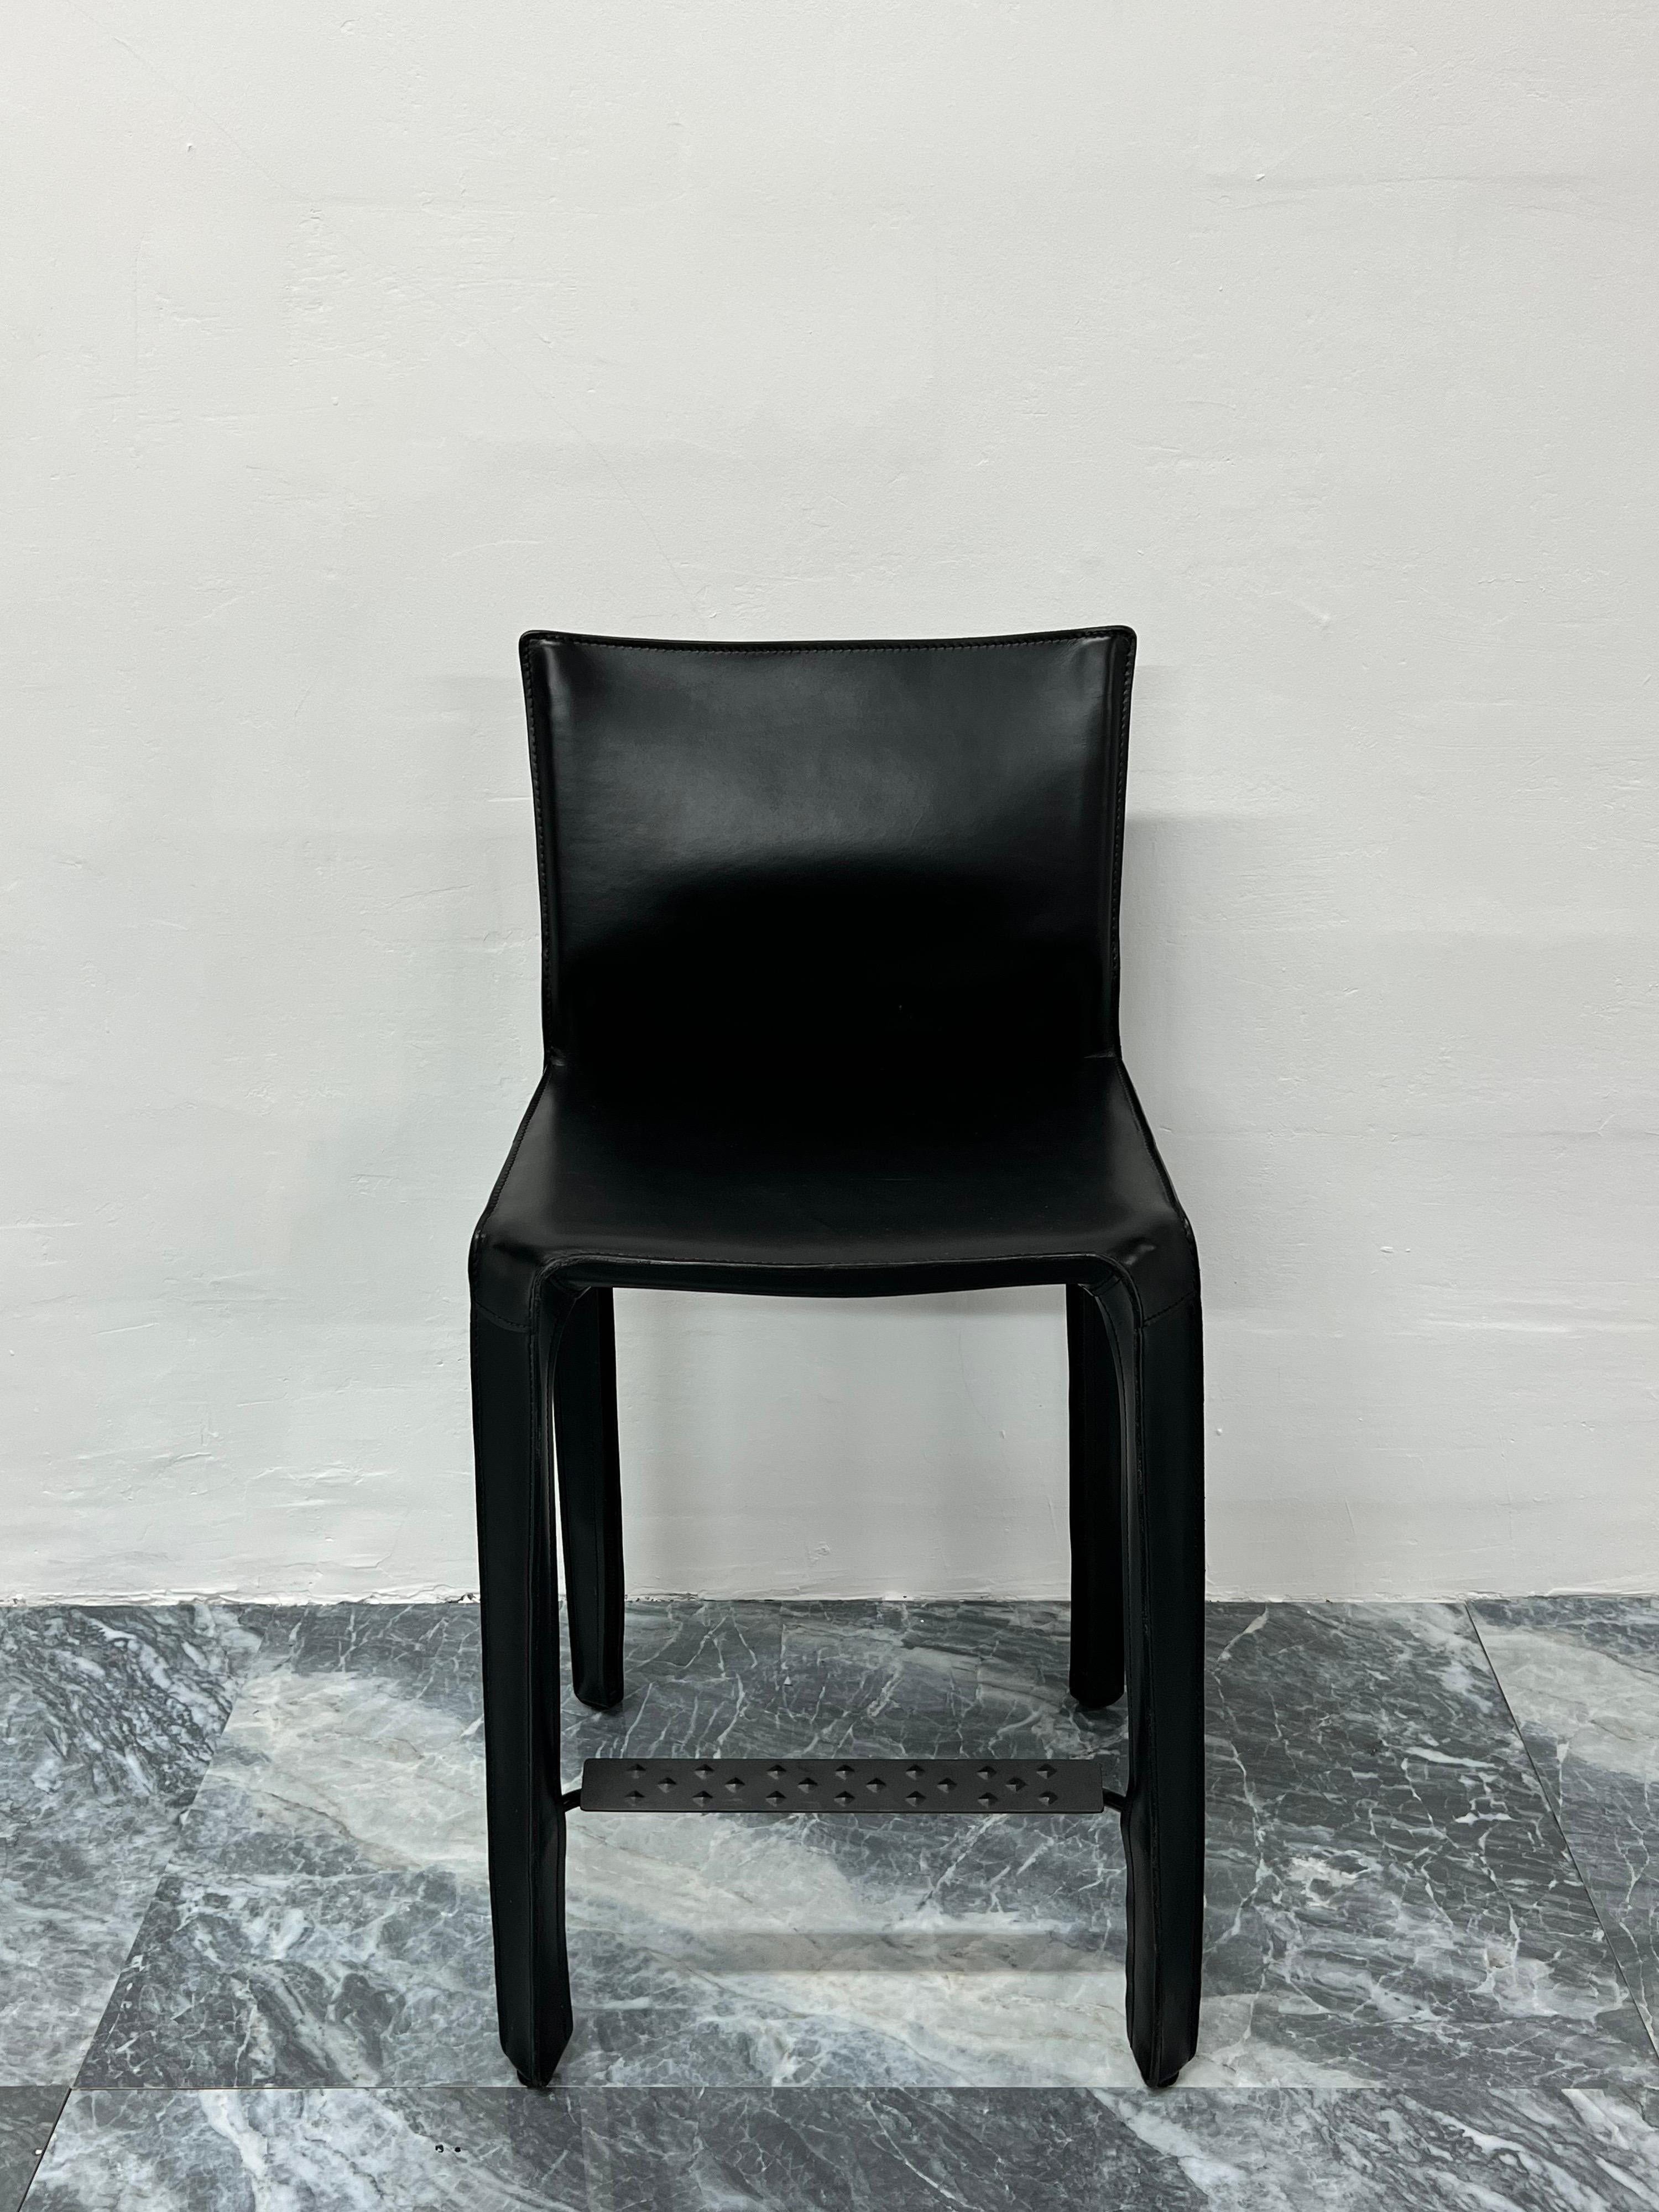 Black leather CAB 410 counter height stool designed by Mario Bellini for Cassina. 

“This was a new kind of chair, constructed totally out of leather, much cloned since then.” Thus Mario Bellini describes Cab, a best-seller that he designed in the